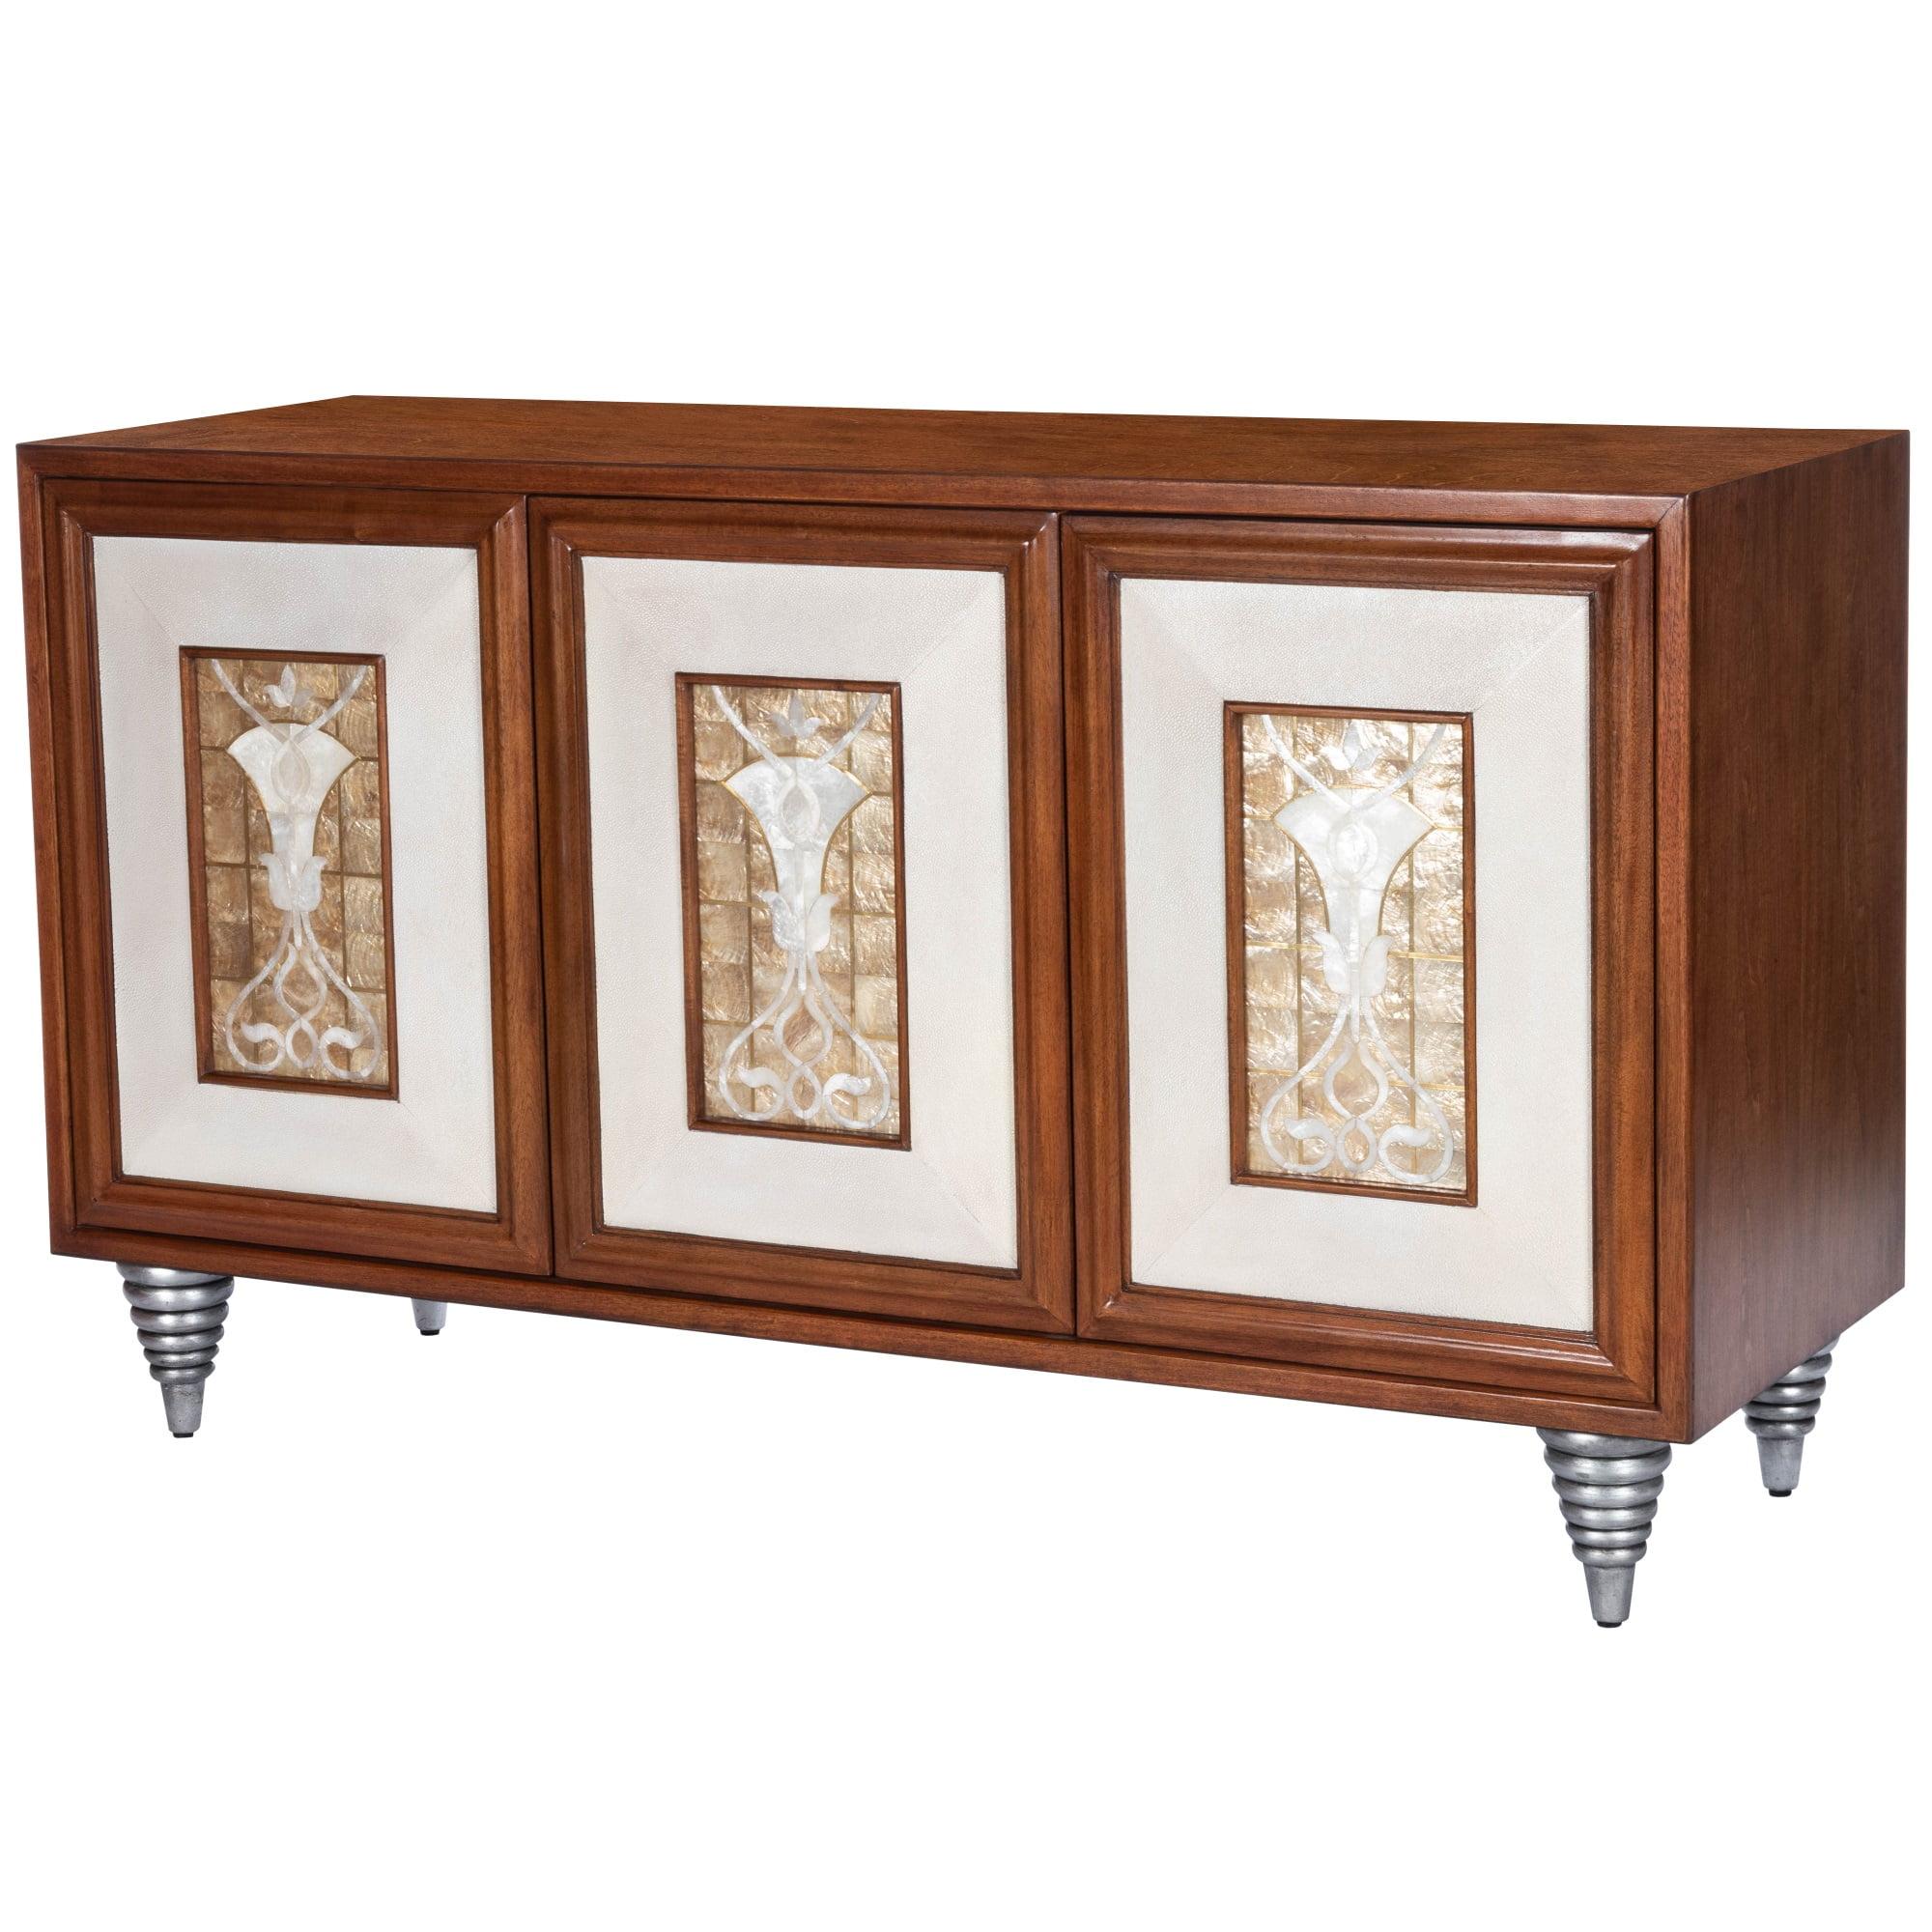 Shelly Capiz Shell & Leather Inlay 180" Sideboard in Brown